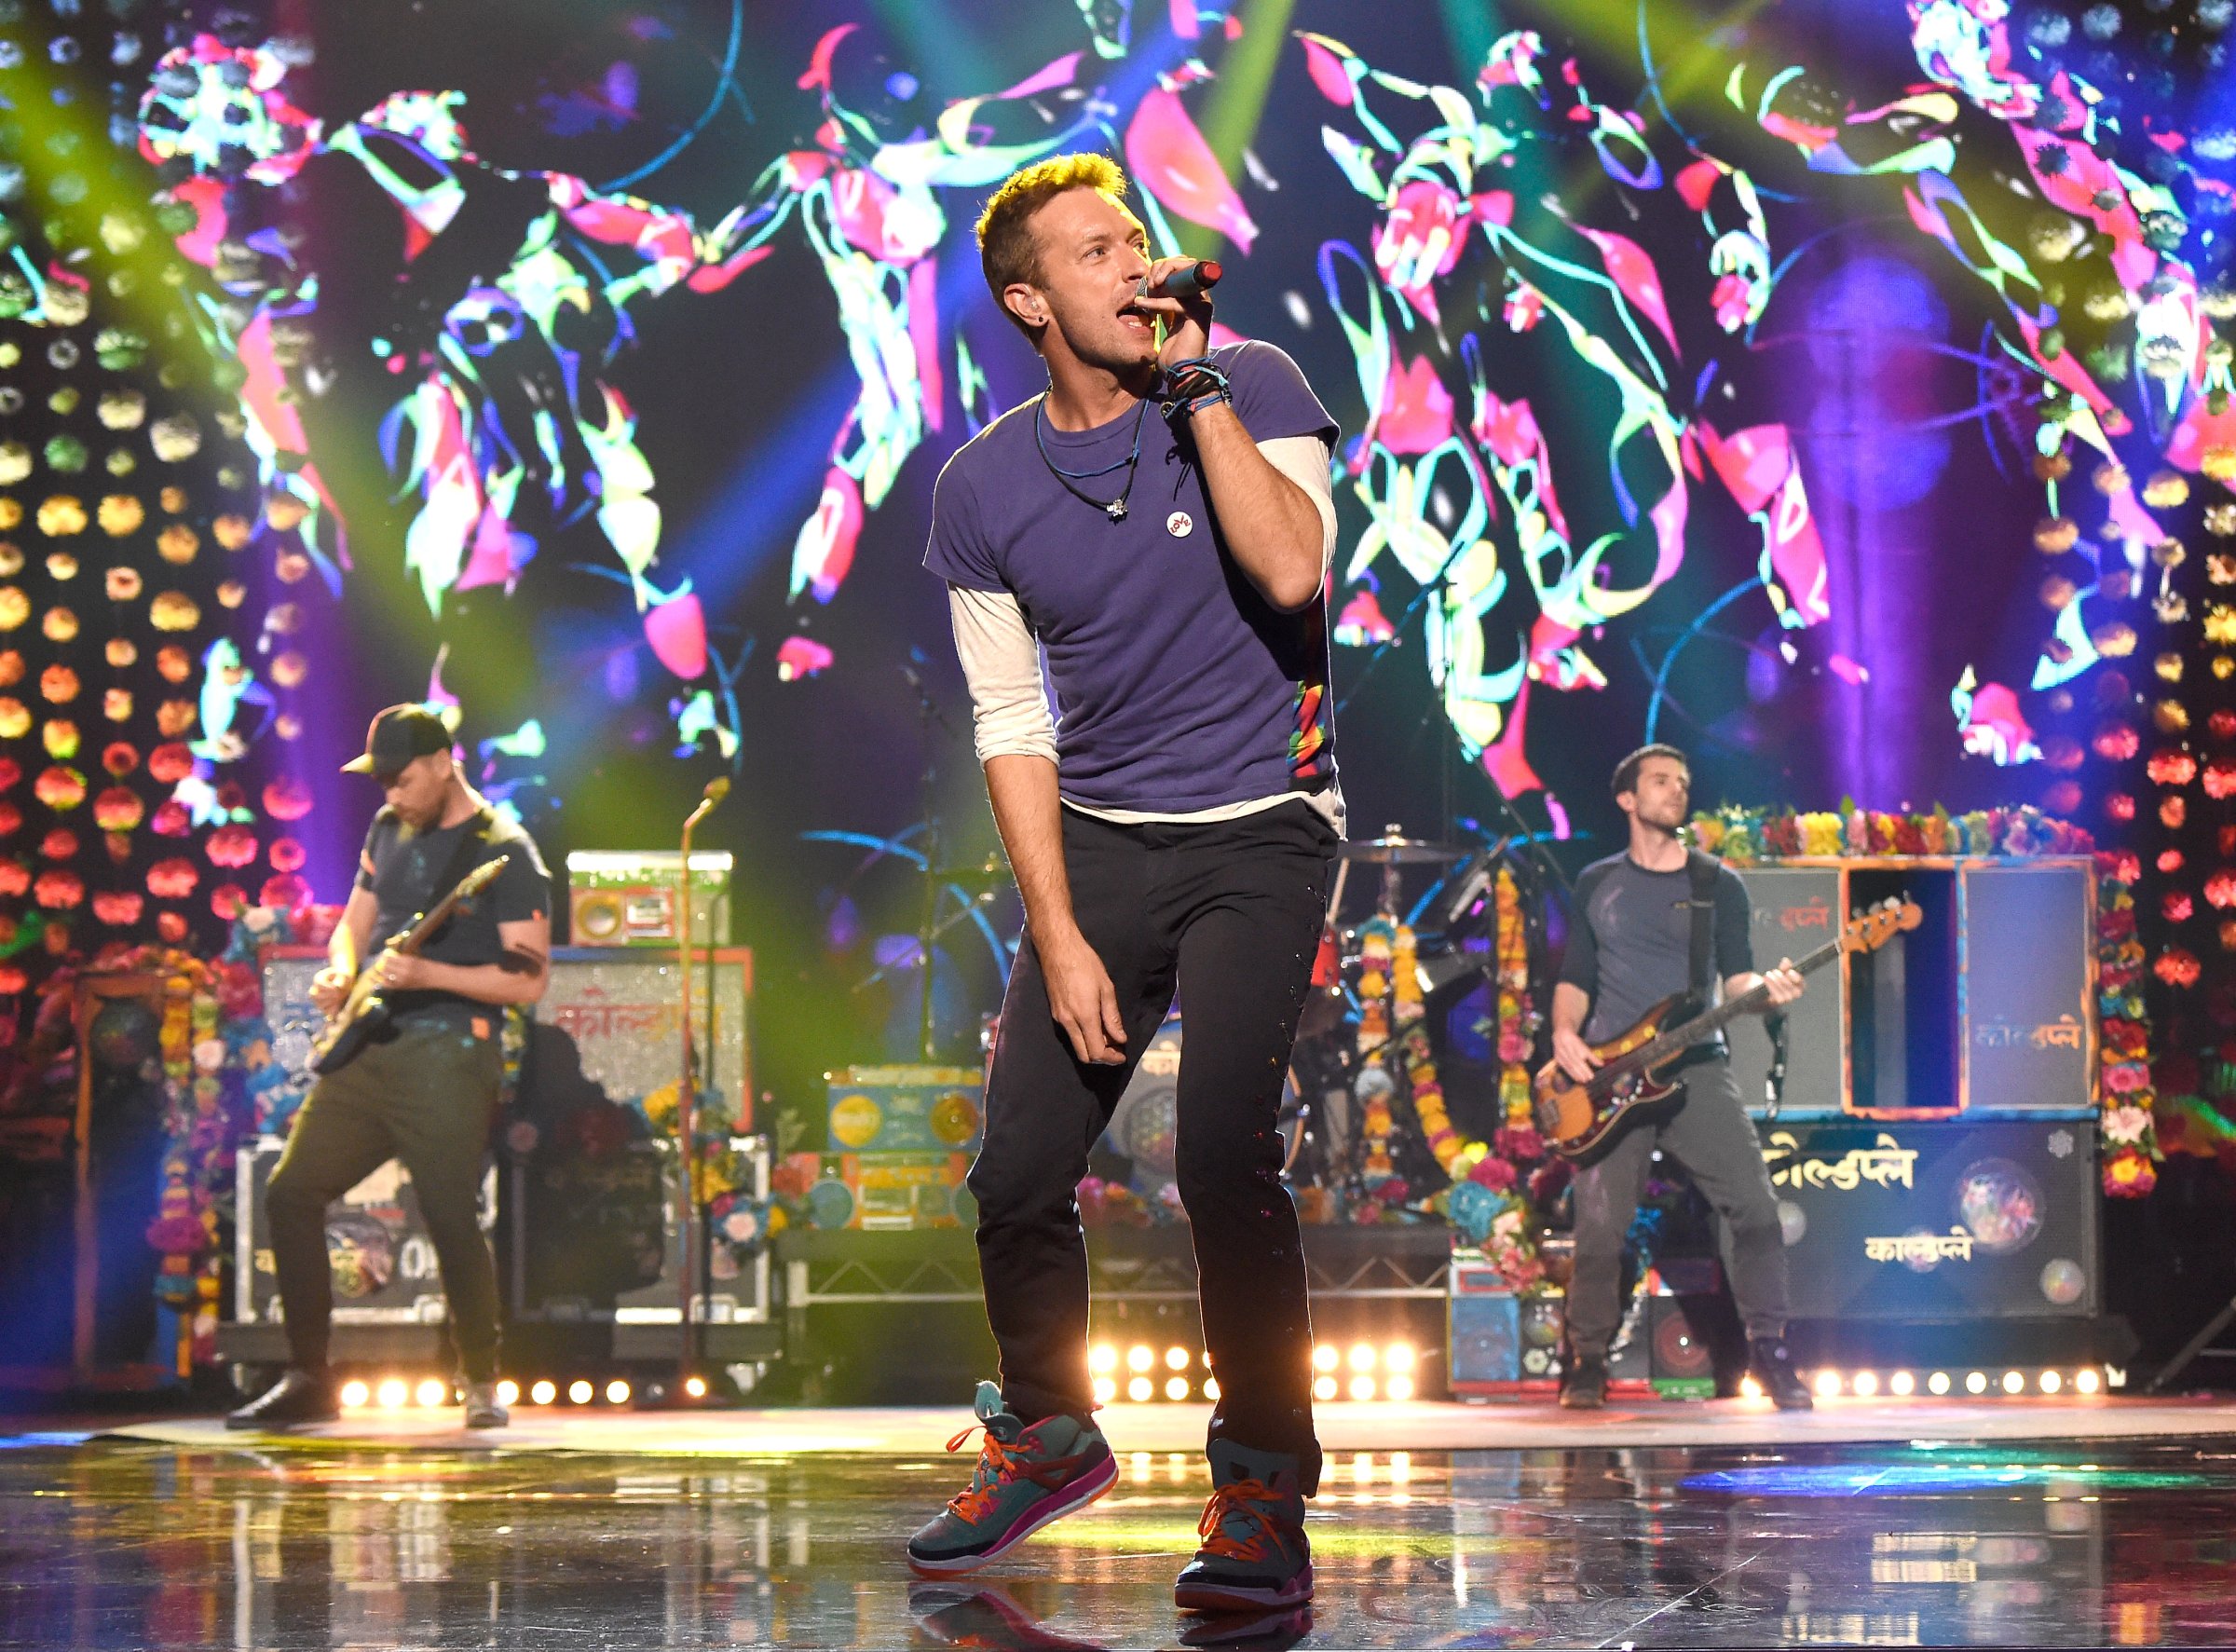 Chris Martin of Coldplay performs onstage during the 2015 American Music Awards at Microsoft Theater on Nov. 22, 2015 in Los Angeles.